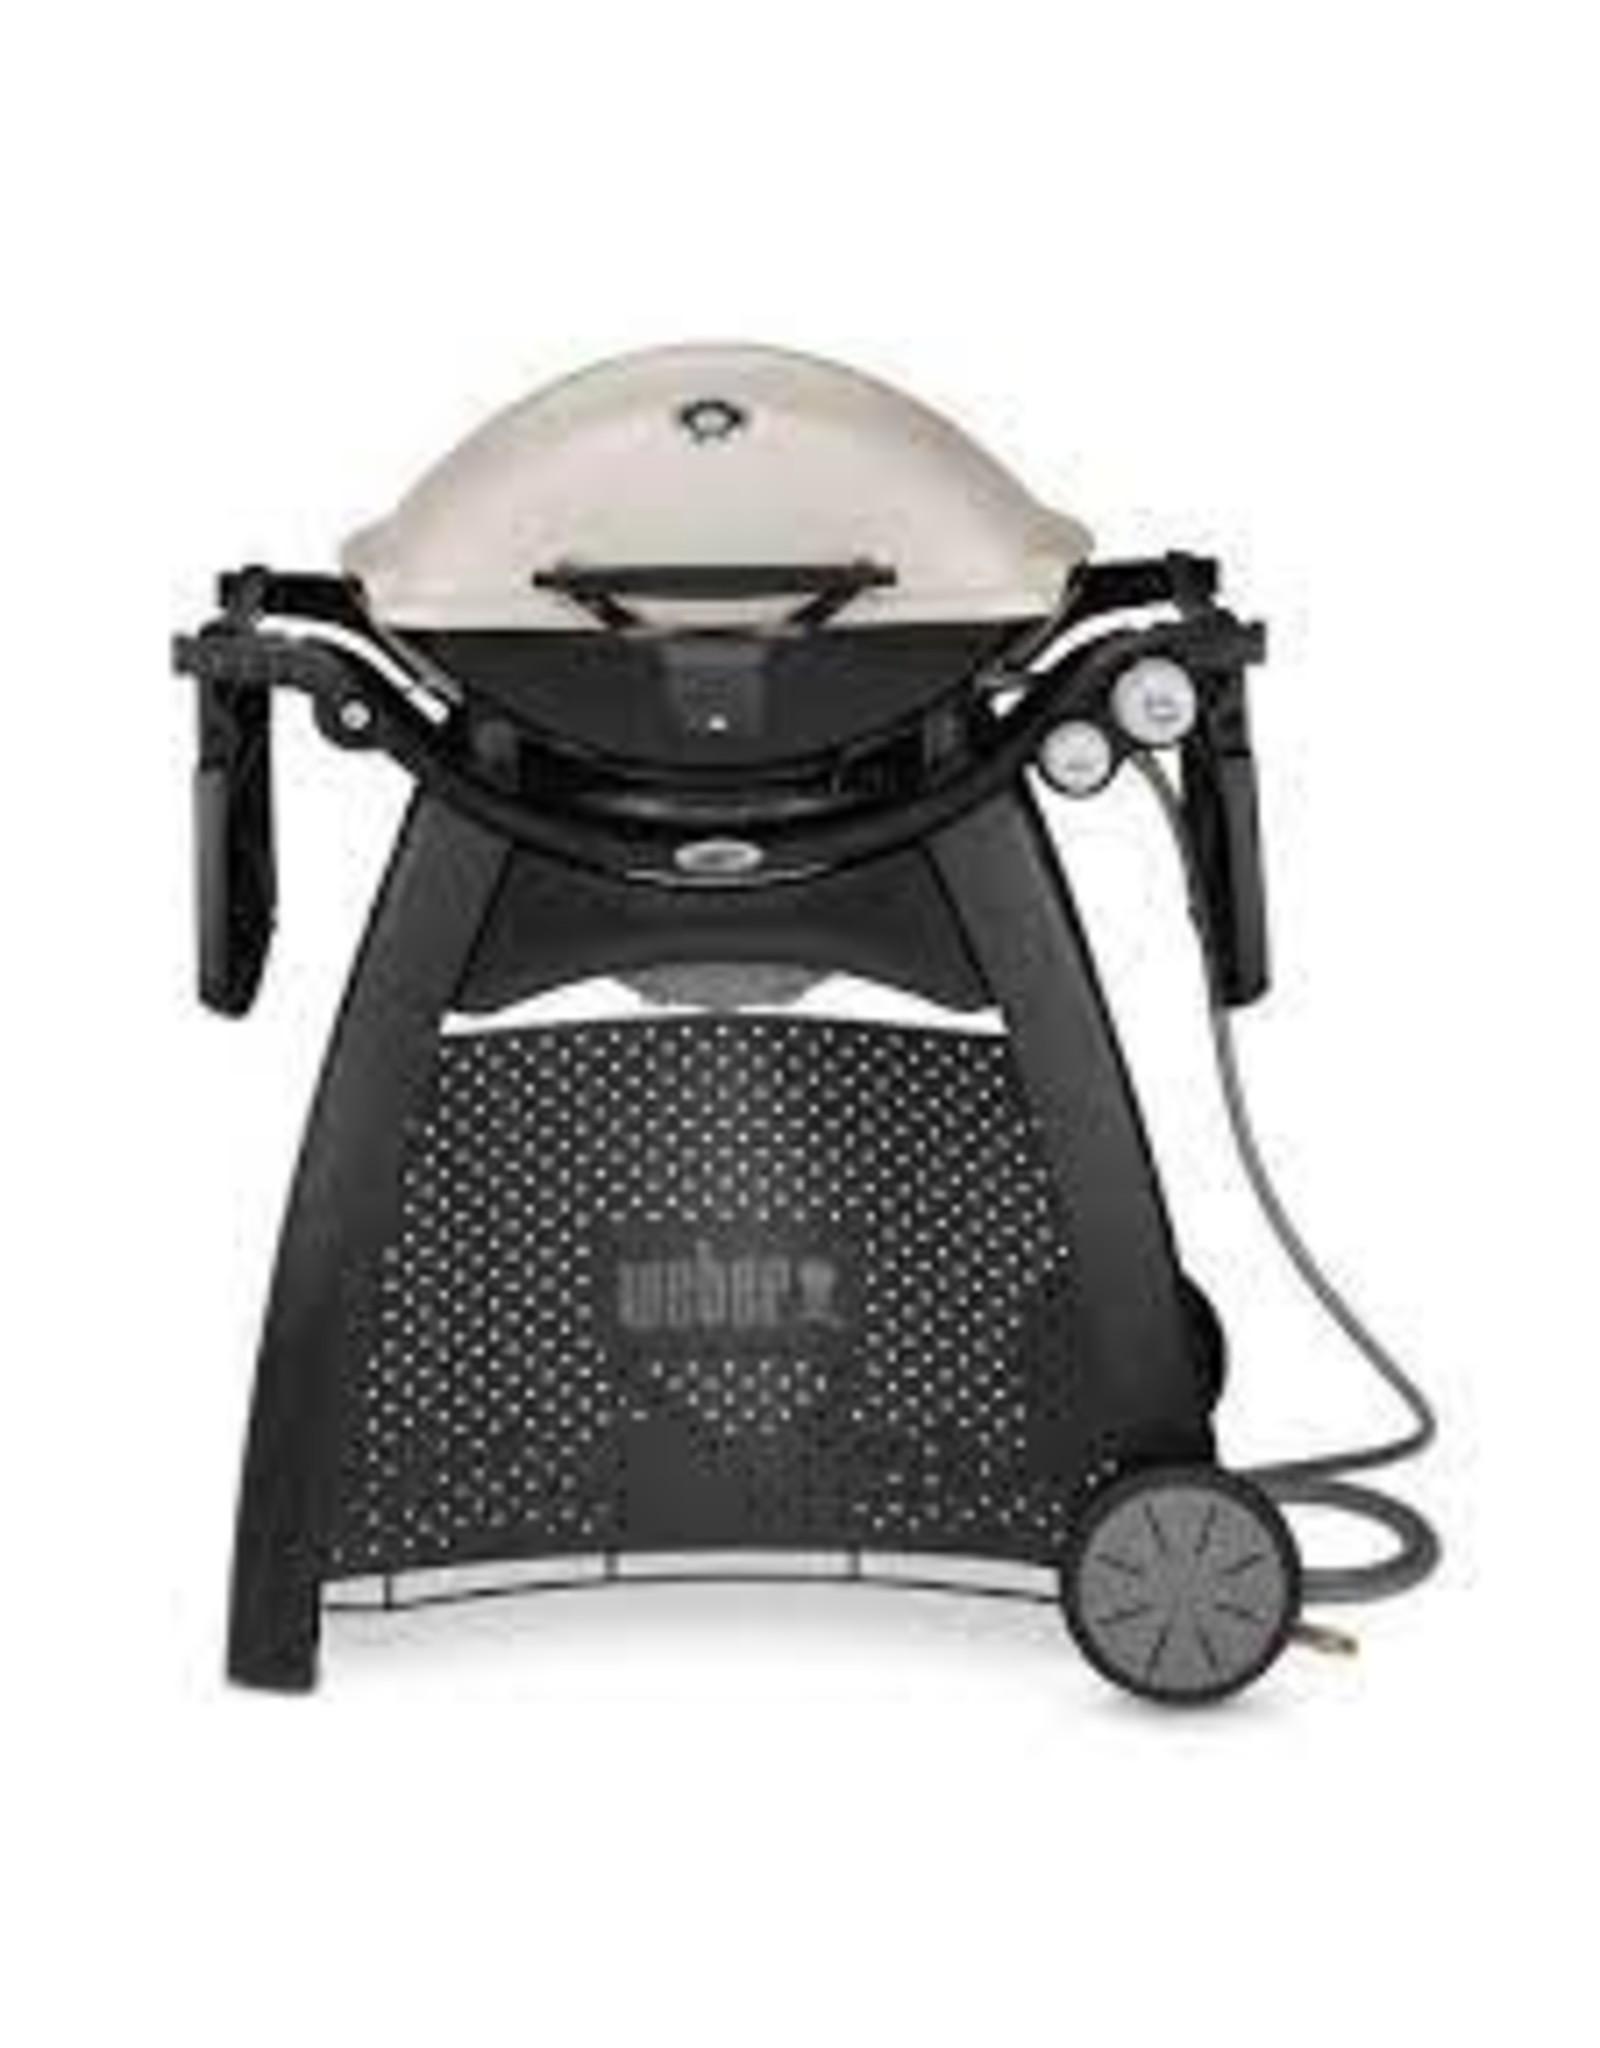 weber WEBER Q 3200 2-Burner Propane Gas Grill in Titanium with Built-In Thermomter